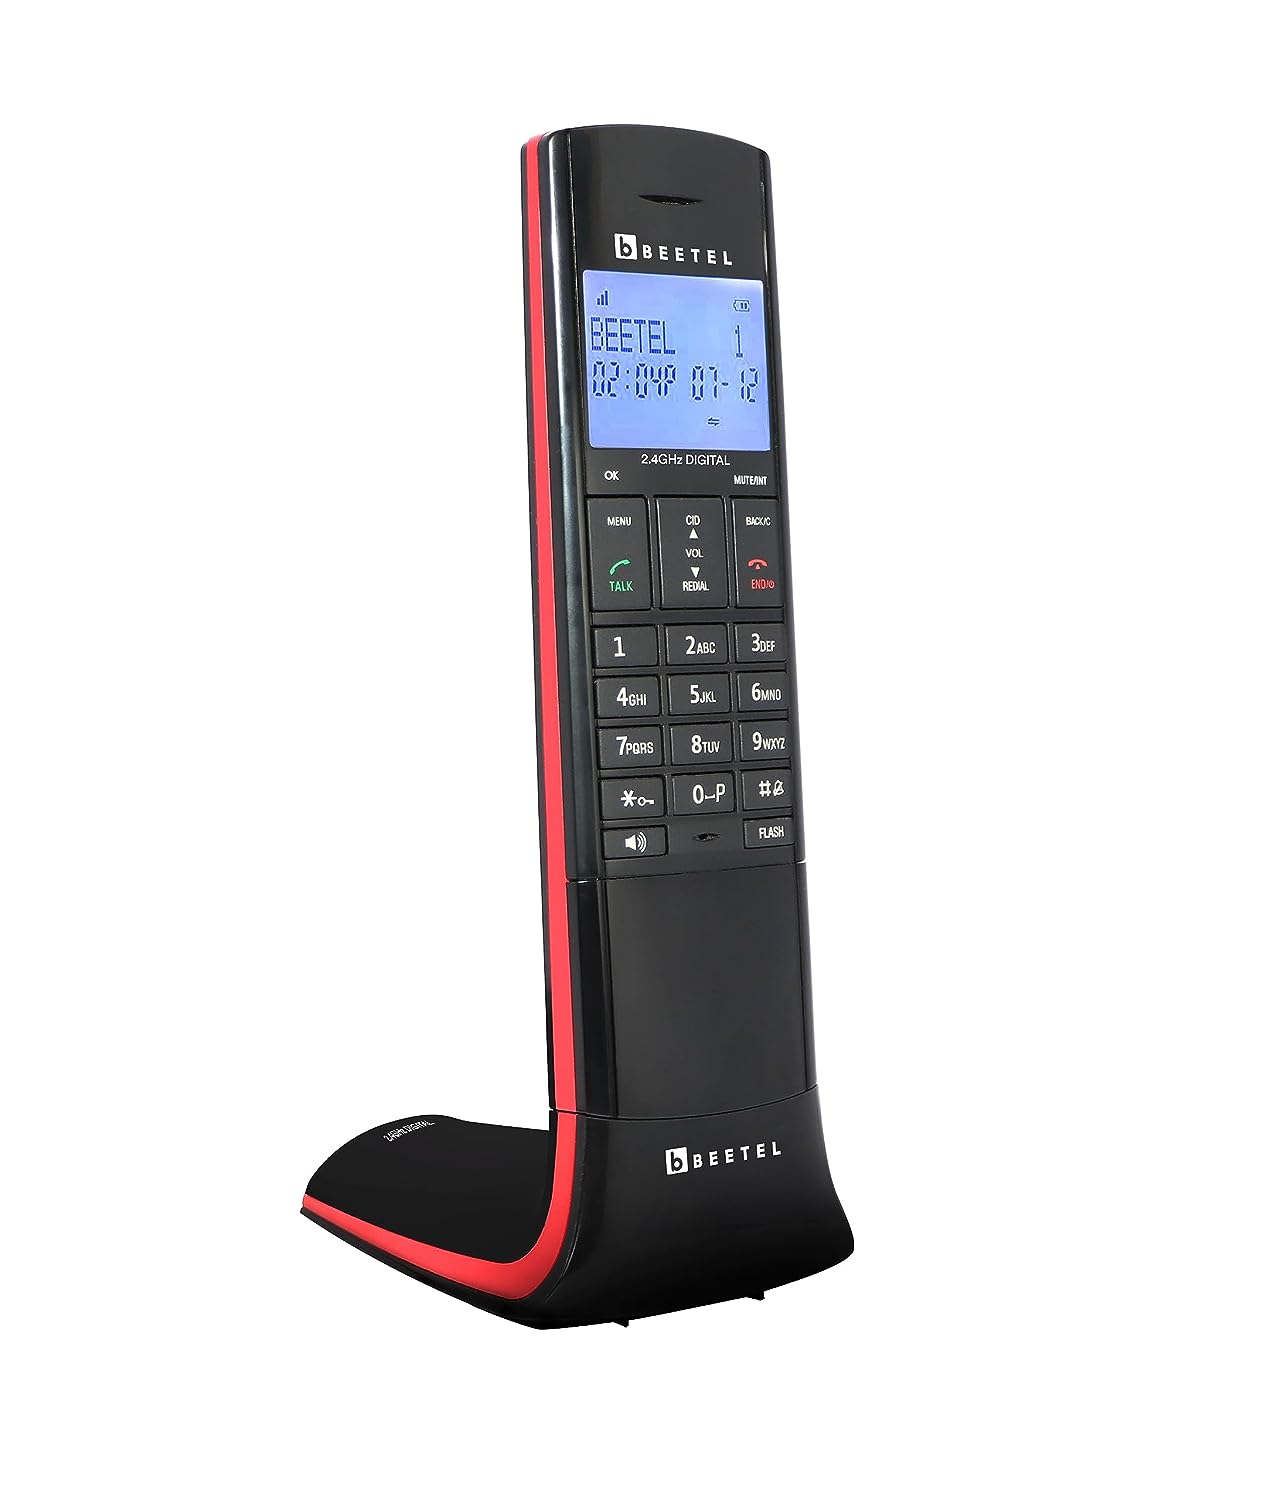 Beetel Newly Launched X95 Designer Cordless landline, Proudly Designed in India, 2.4GHz, Dual Tone, Blue-White LCD, 2-Way Speaker Phone, Ringer & Volume Control, Auto Answer, Alarm (X95)(Black/Red) - Mahajan Electronics Online